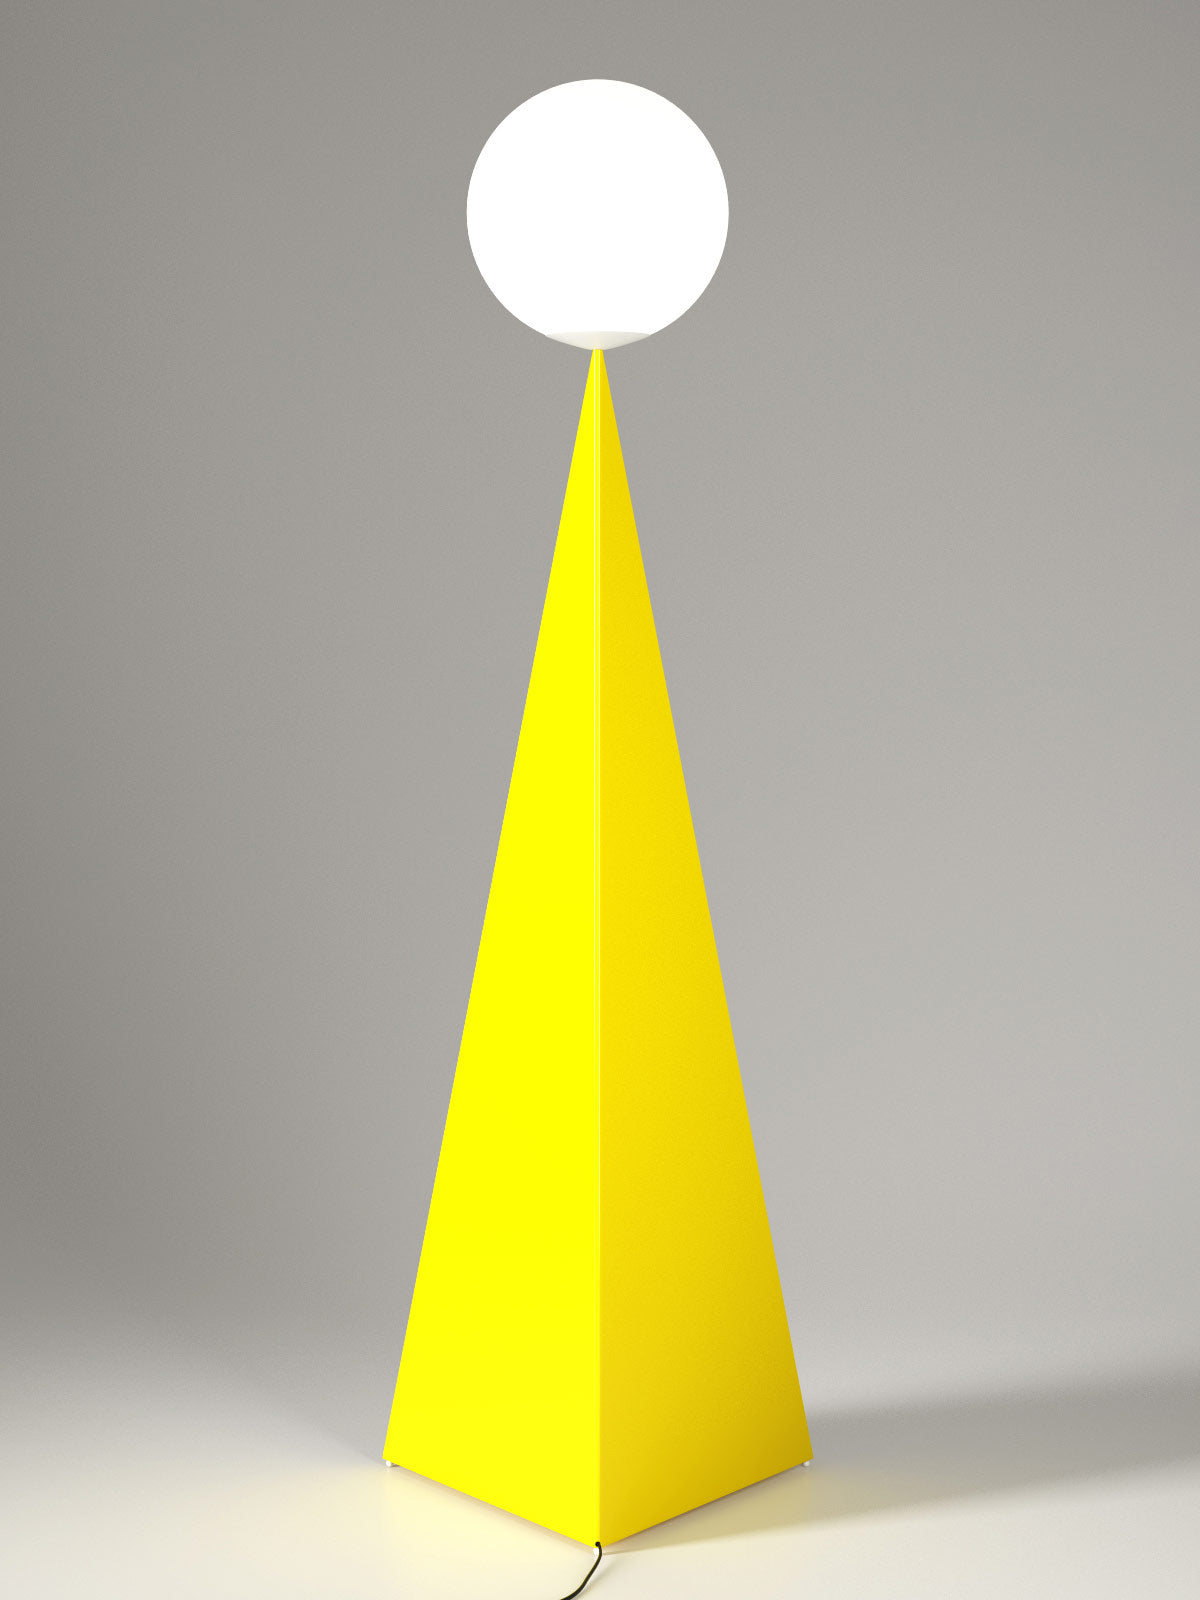 Bonhomme 176 Floor Light · €1387 · ATELIER ARETI | CURATED BY EYEDS